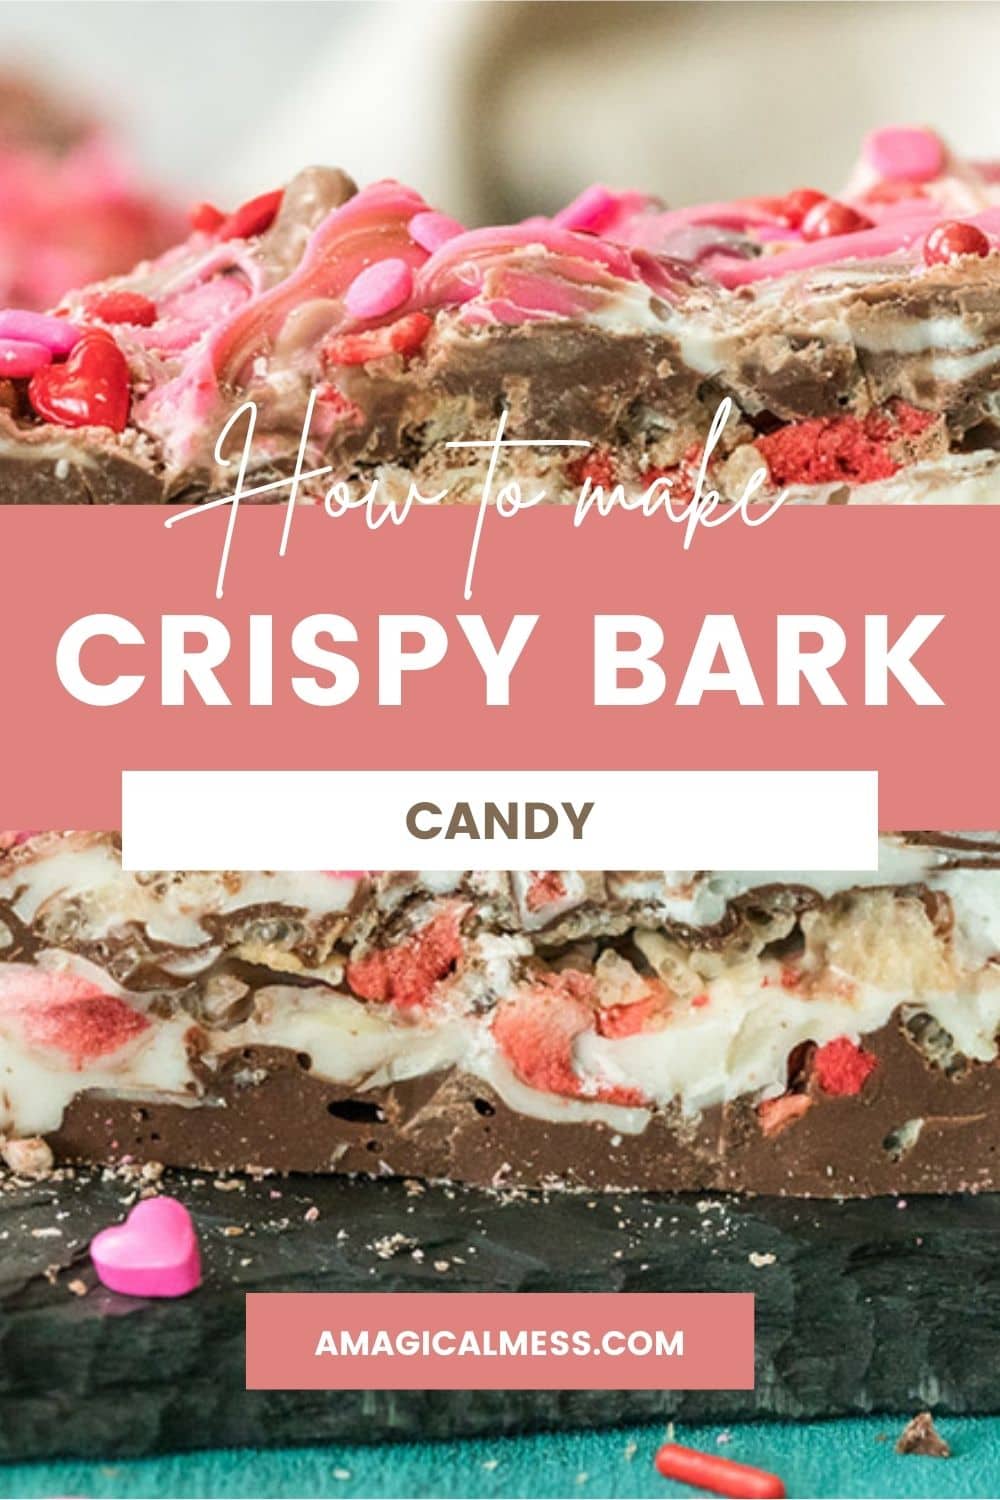 Layers of crispy bark candy stacked on a board.